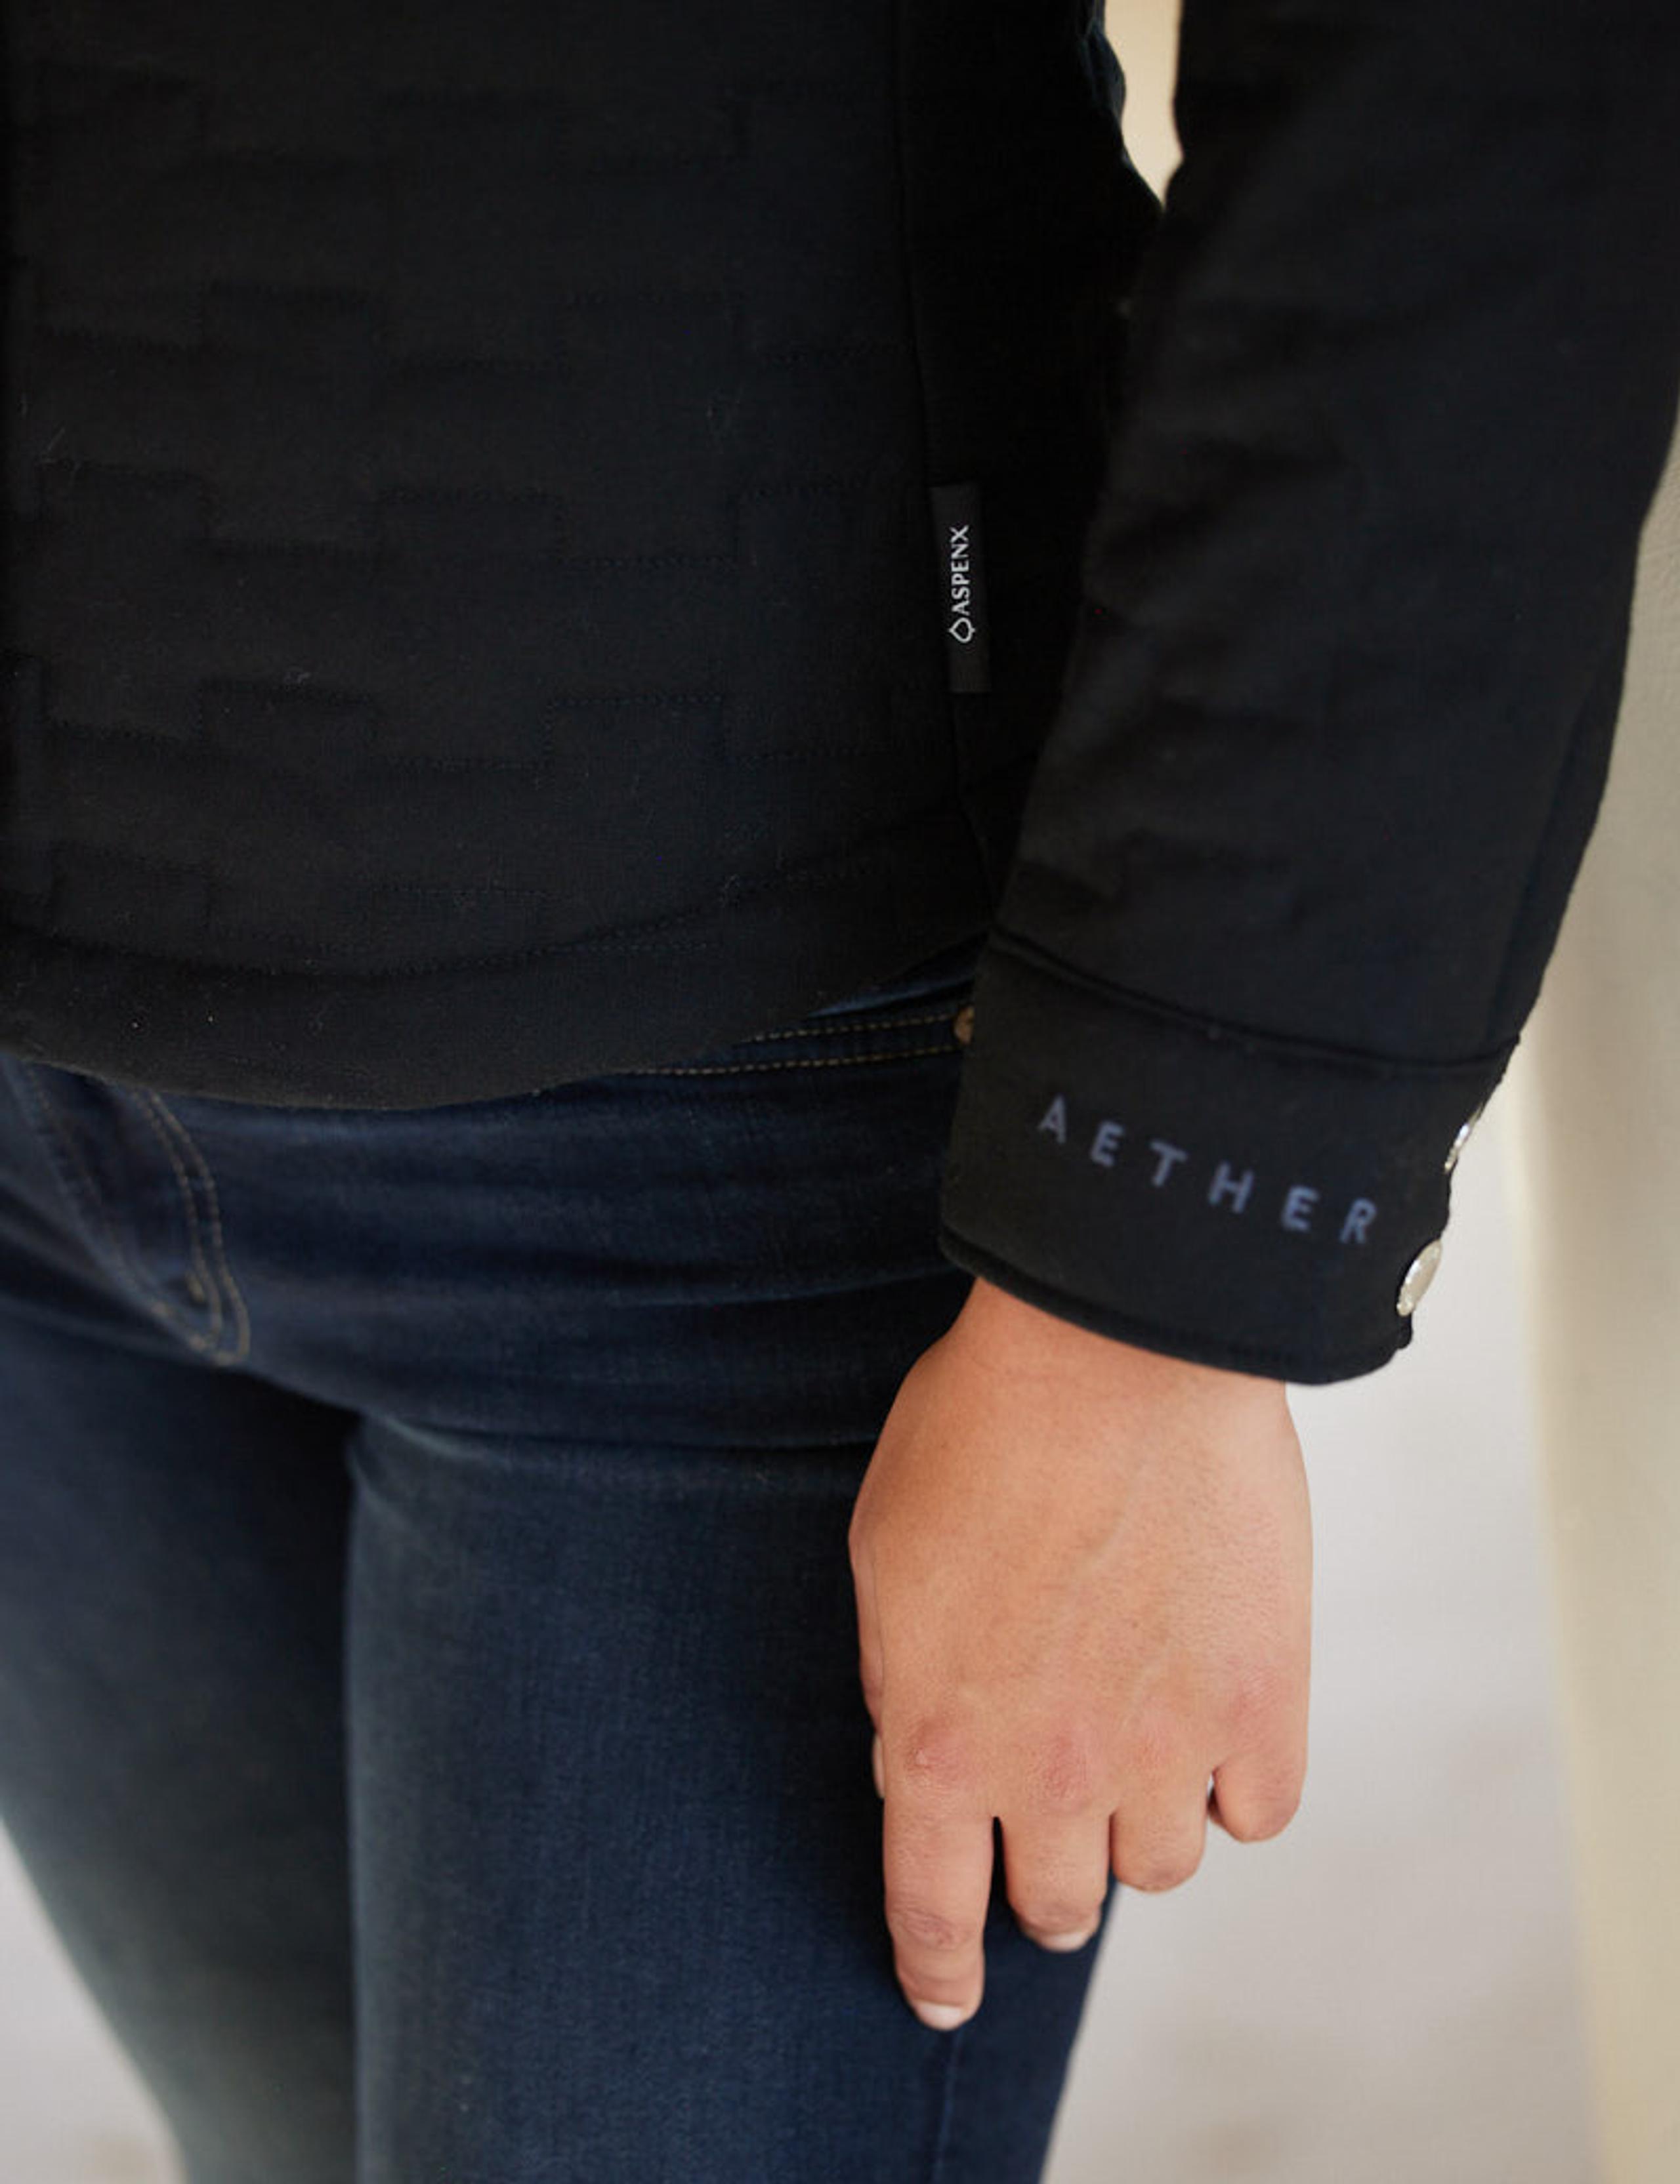 Closeup of sleeve with AETHER logo